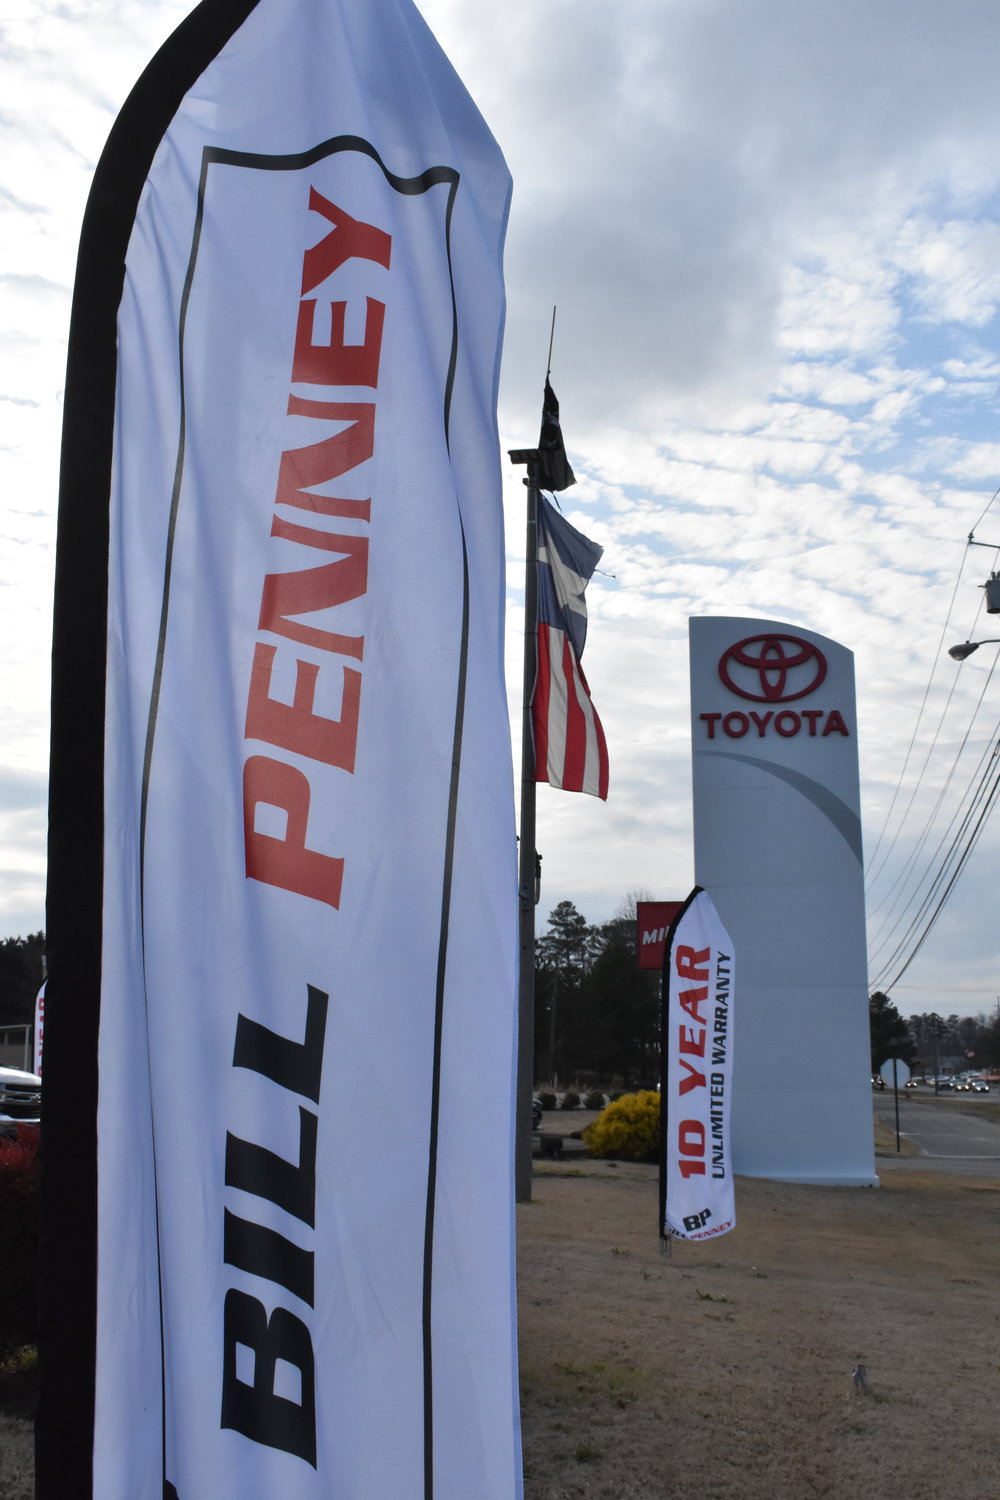 Bill Penney Toyota in Huntsville, AL has a YouTube video showcasing used cars available for under $3,000.